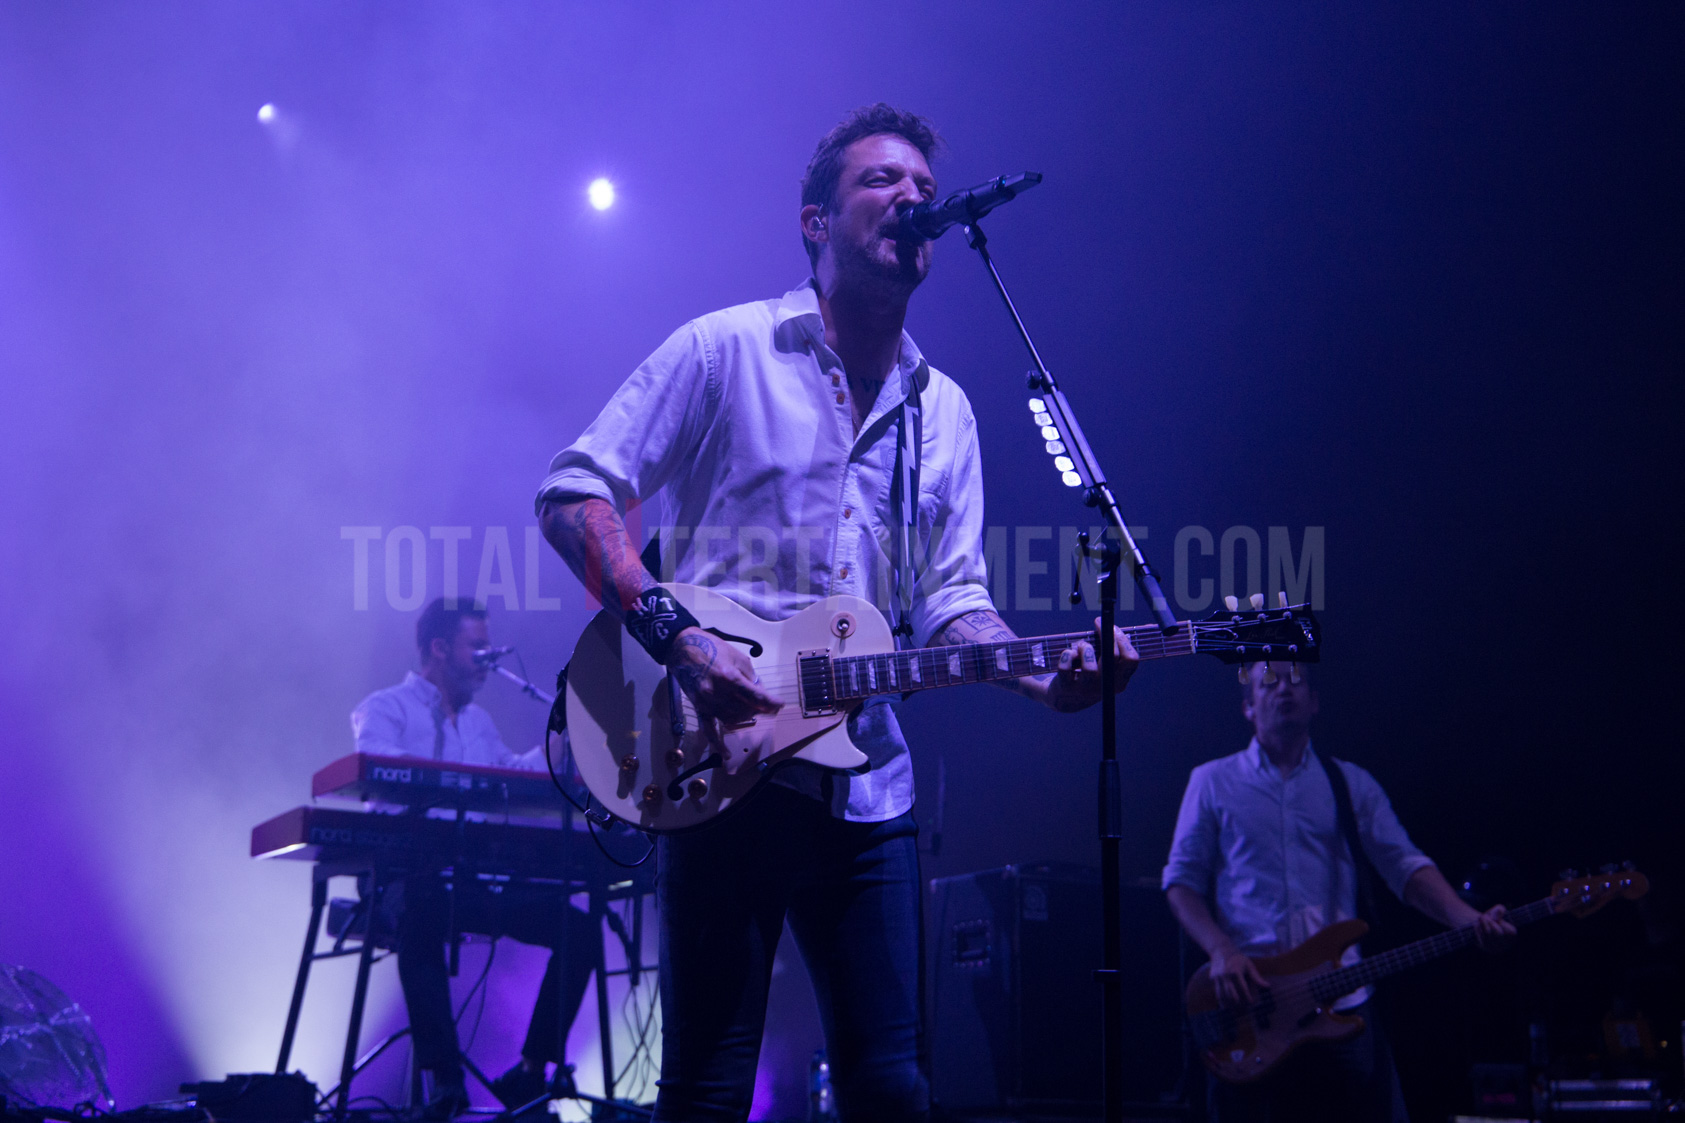 Lost Evenings Festival, TotalNtertainment, Review, Music, Live Event, Christopher Ryan, Frank Turner